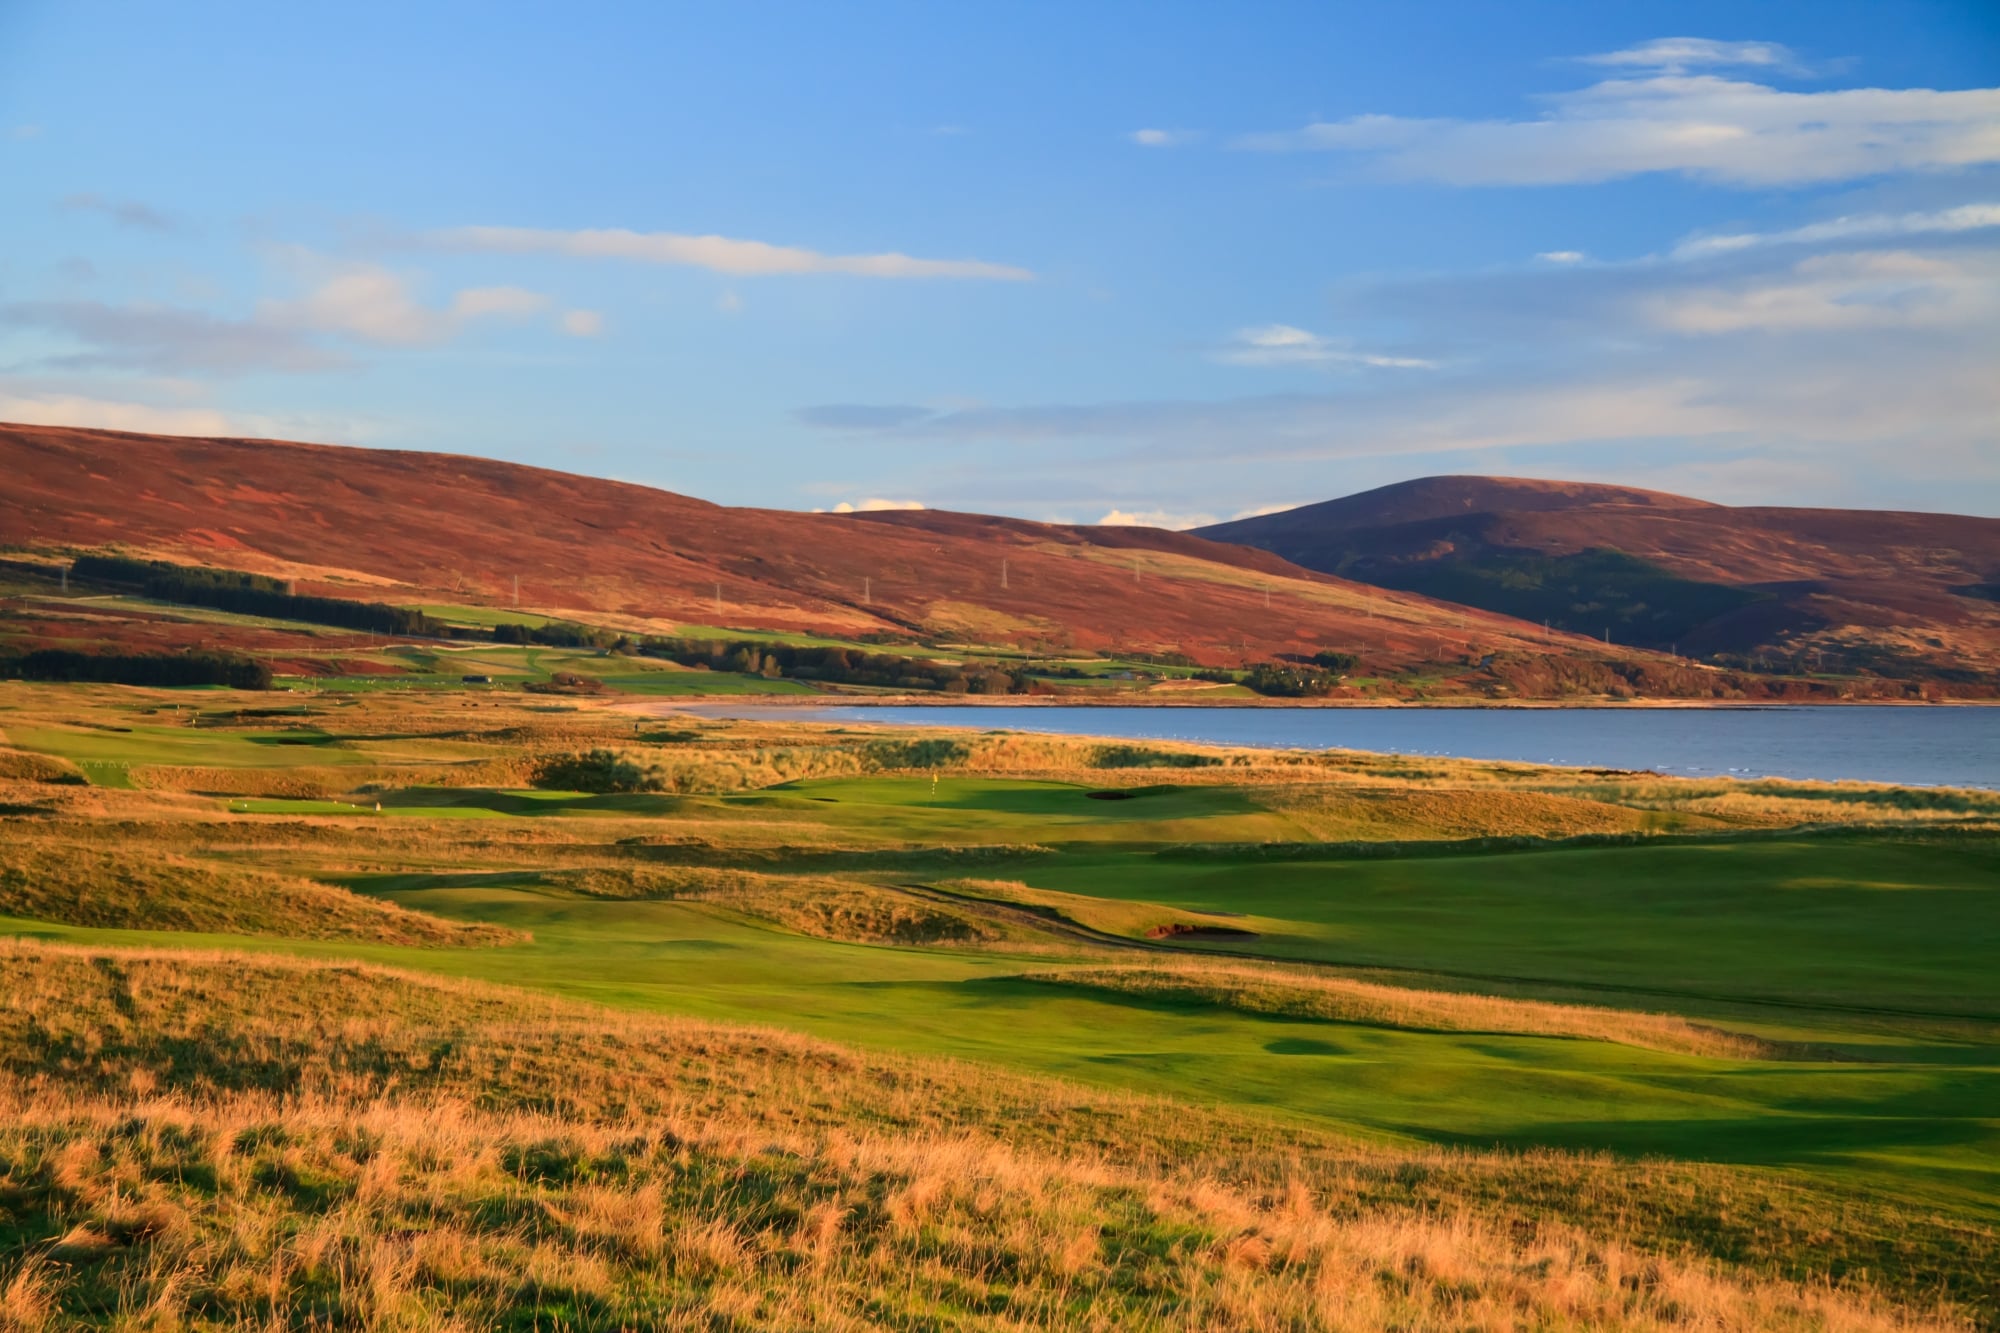 The Brora Golf Club lies directly between The North Sea and mountains